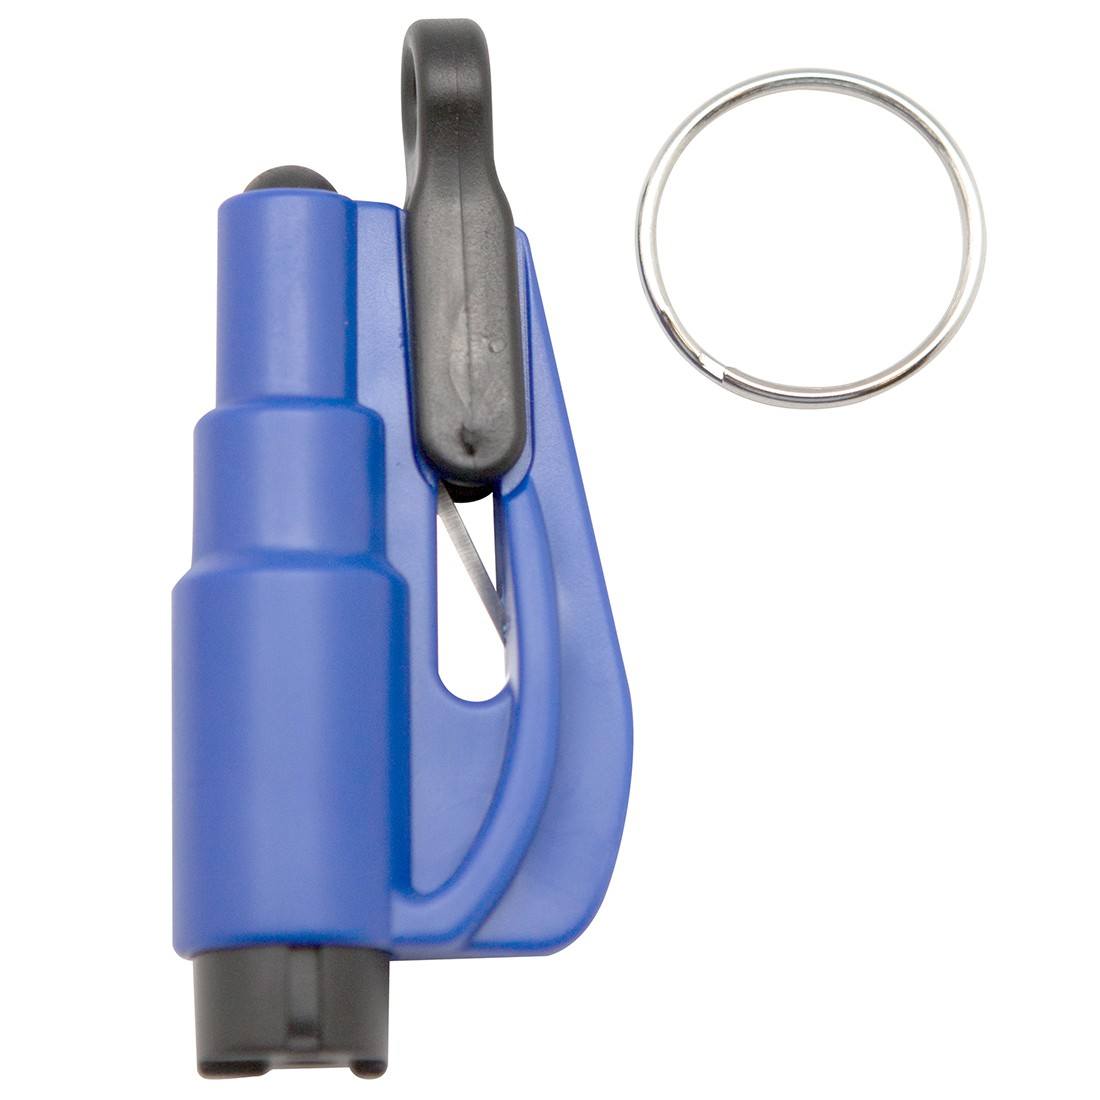 https://evaculife.com.au/wp-content/uploads/2018/04/blue_keychain_glass_breaker_compact_for_home_car_window_with_belt_cutter_2.jpg